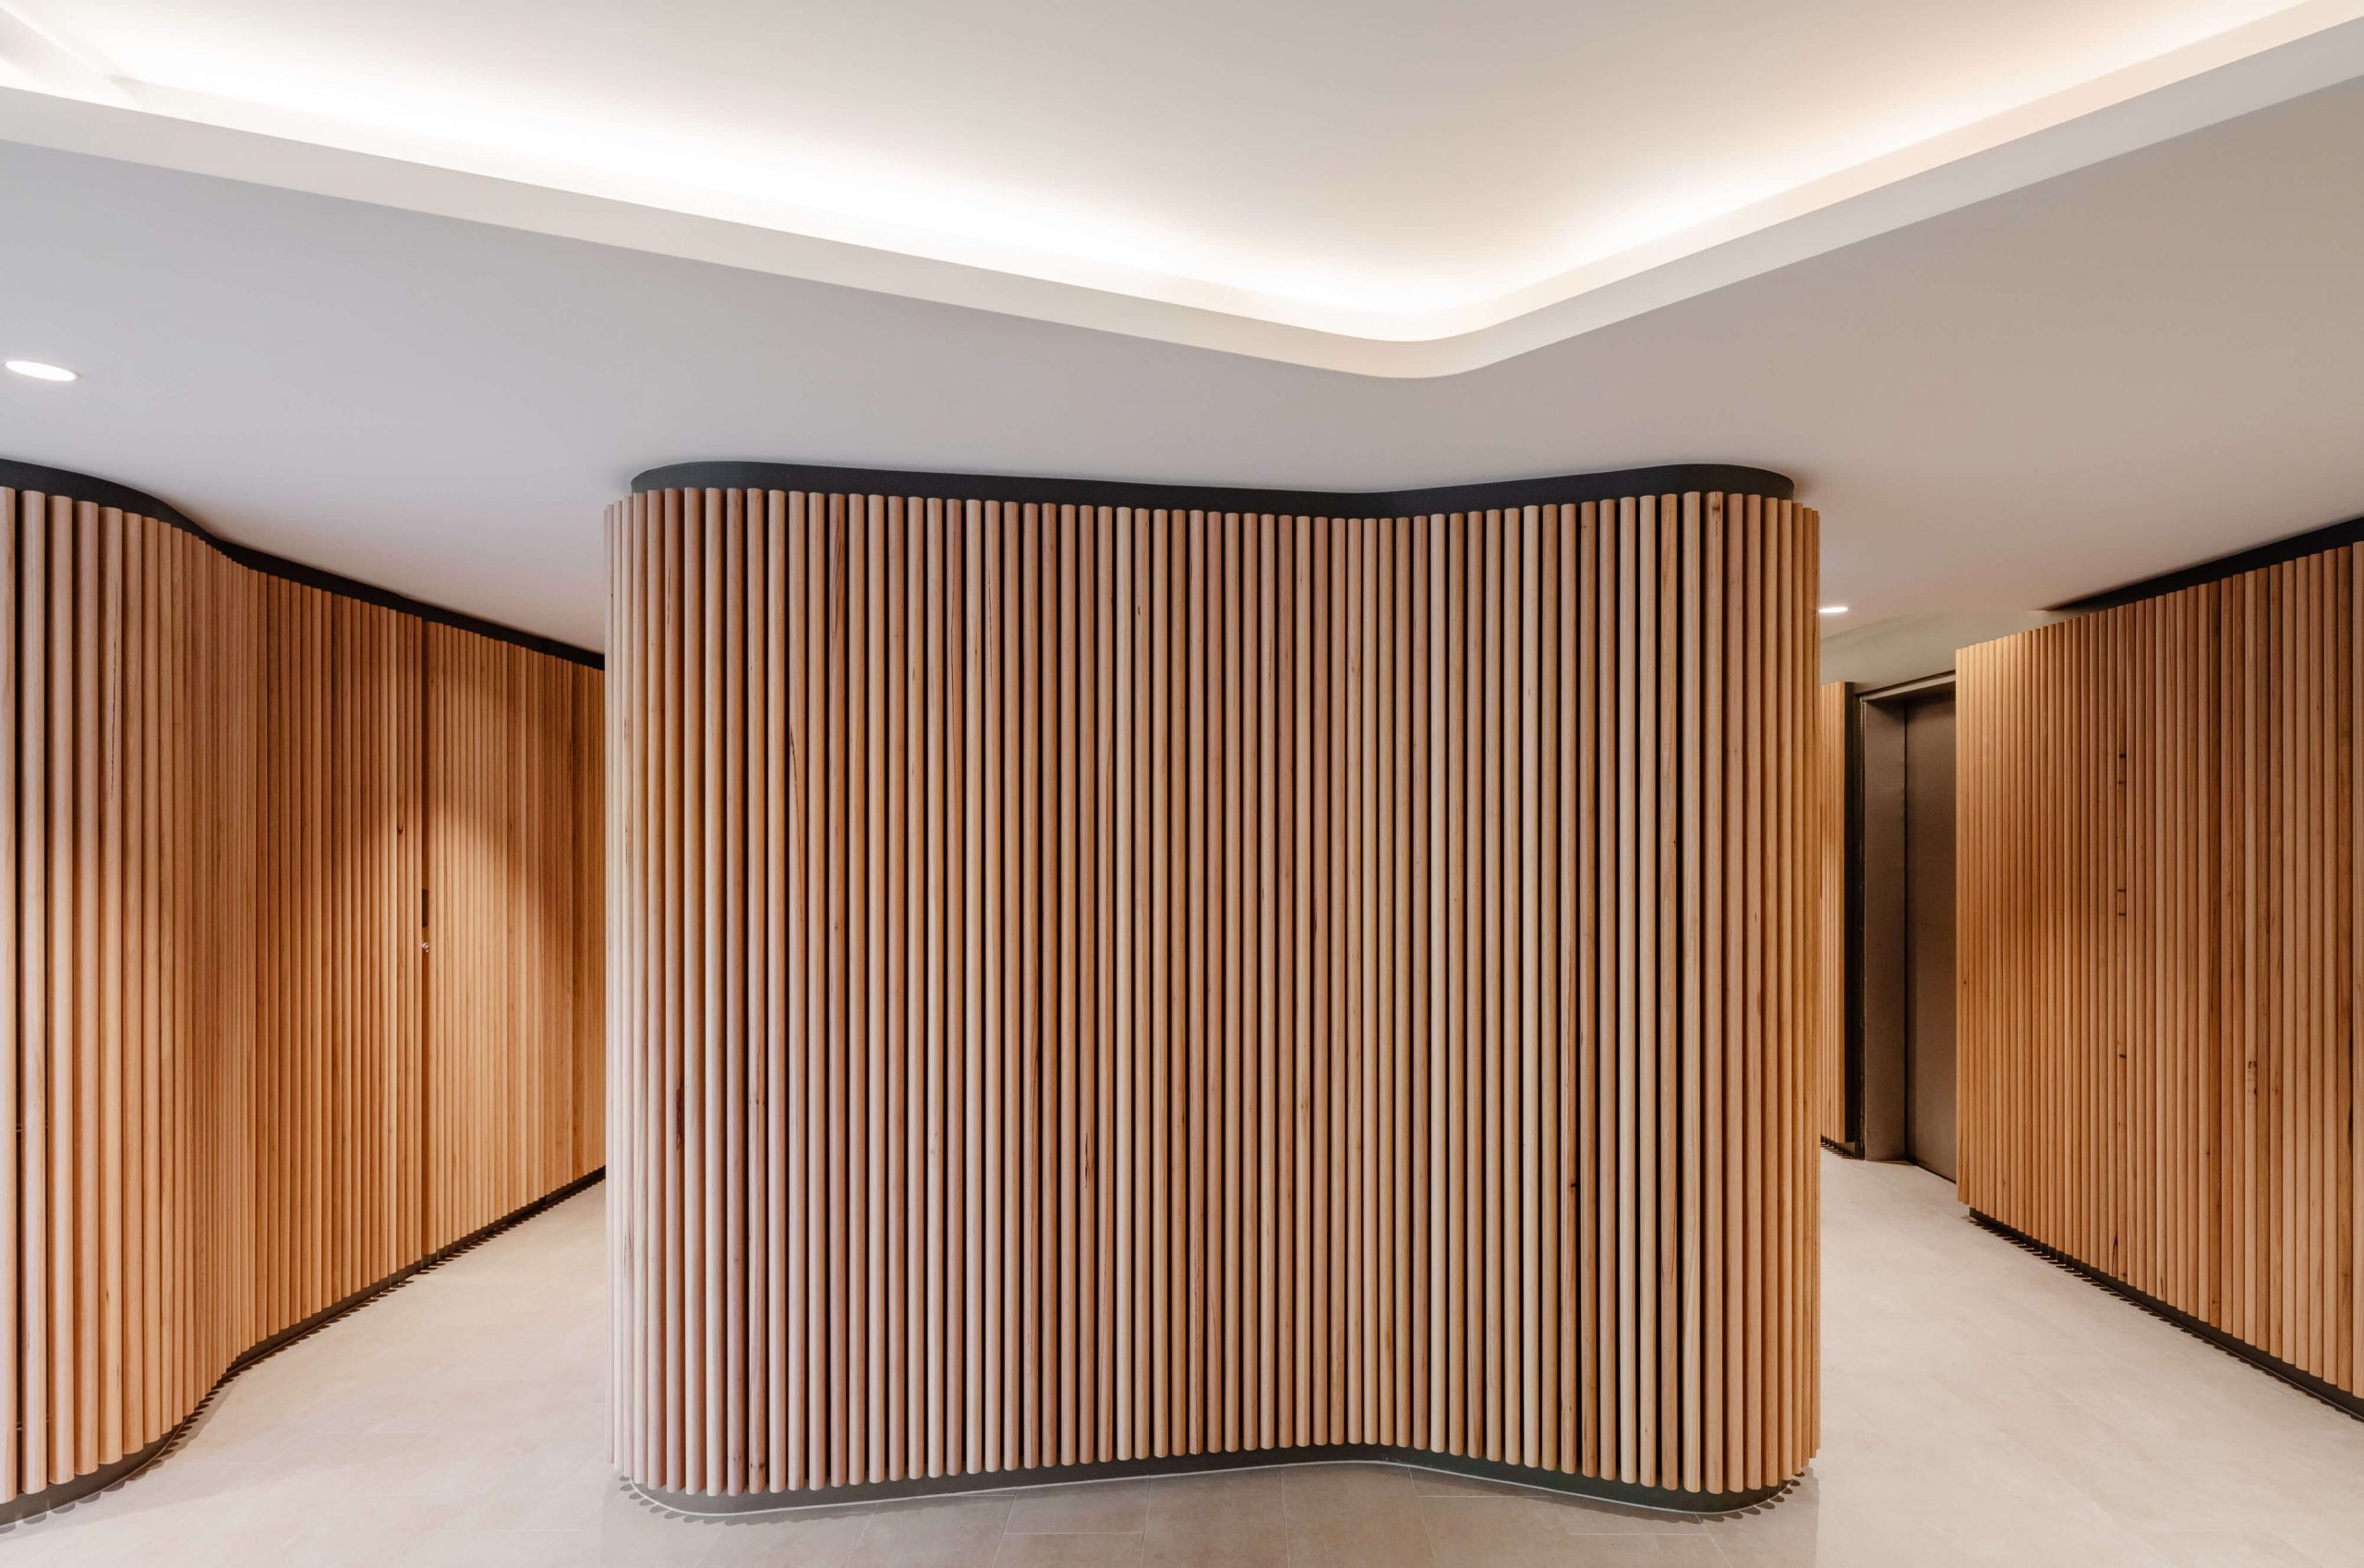 The Best Types of Wood & Designs For Wood Slat Wall Panels